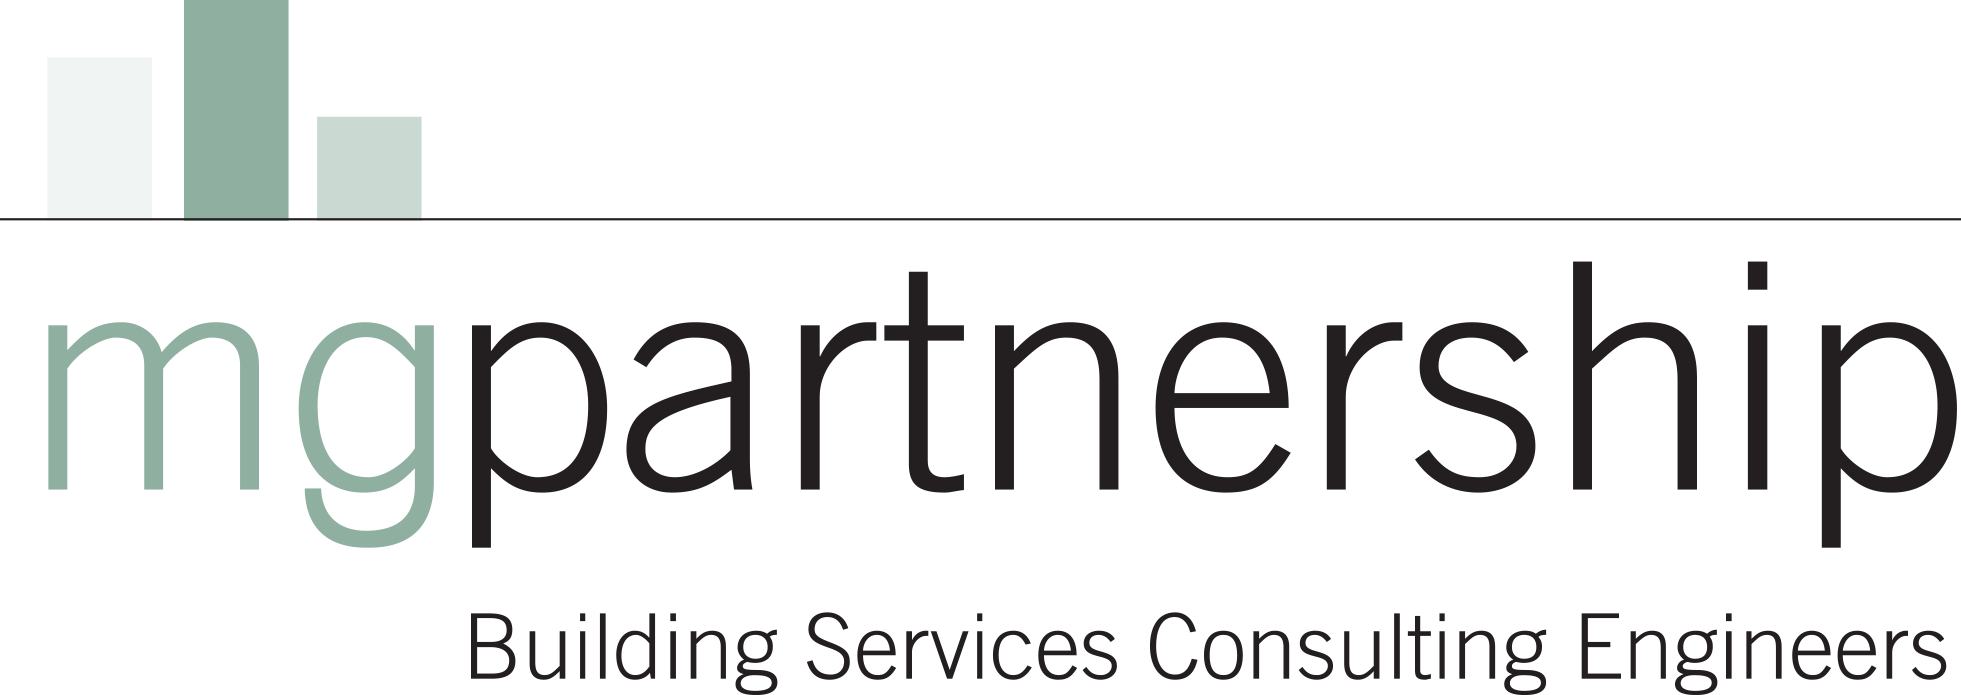 MG Partnership - Building Services Consulting Engineers